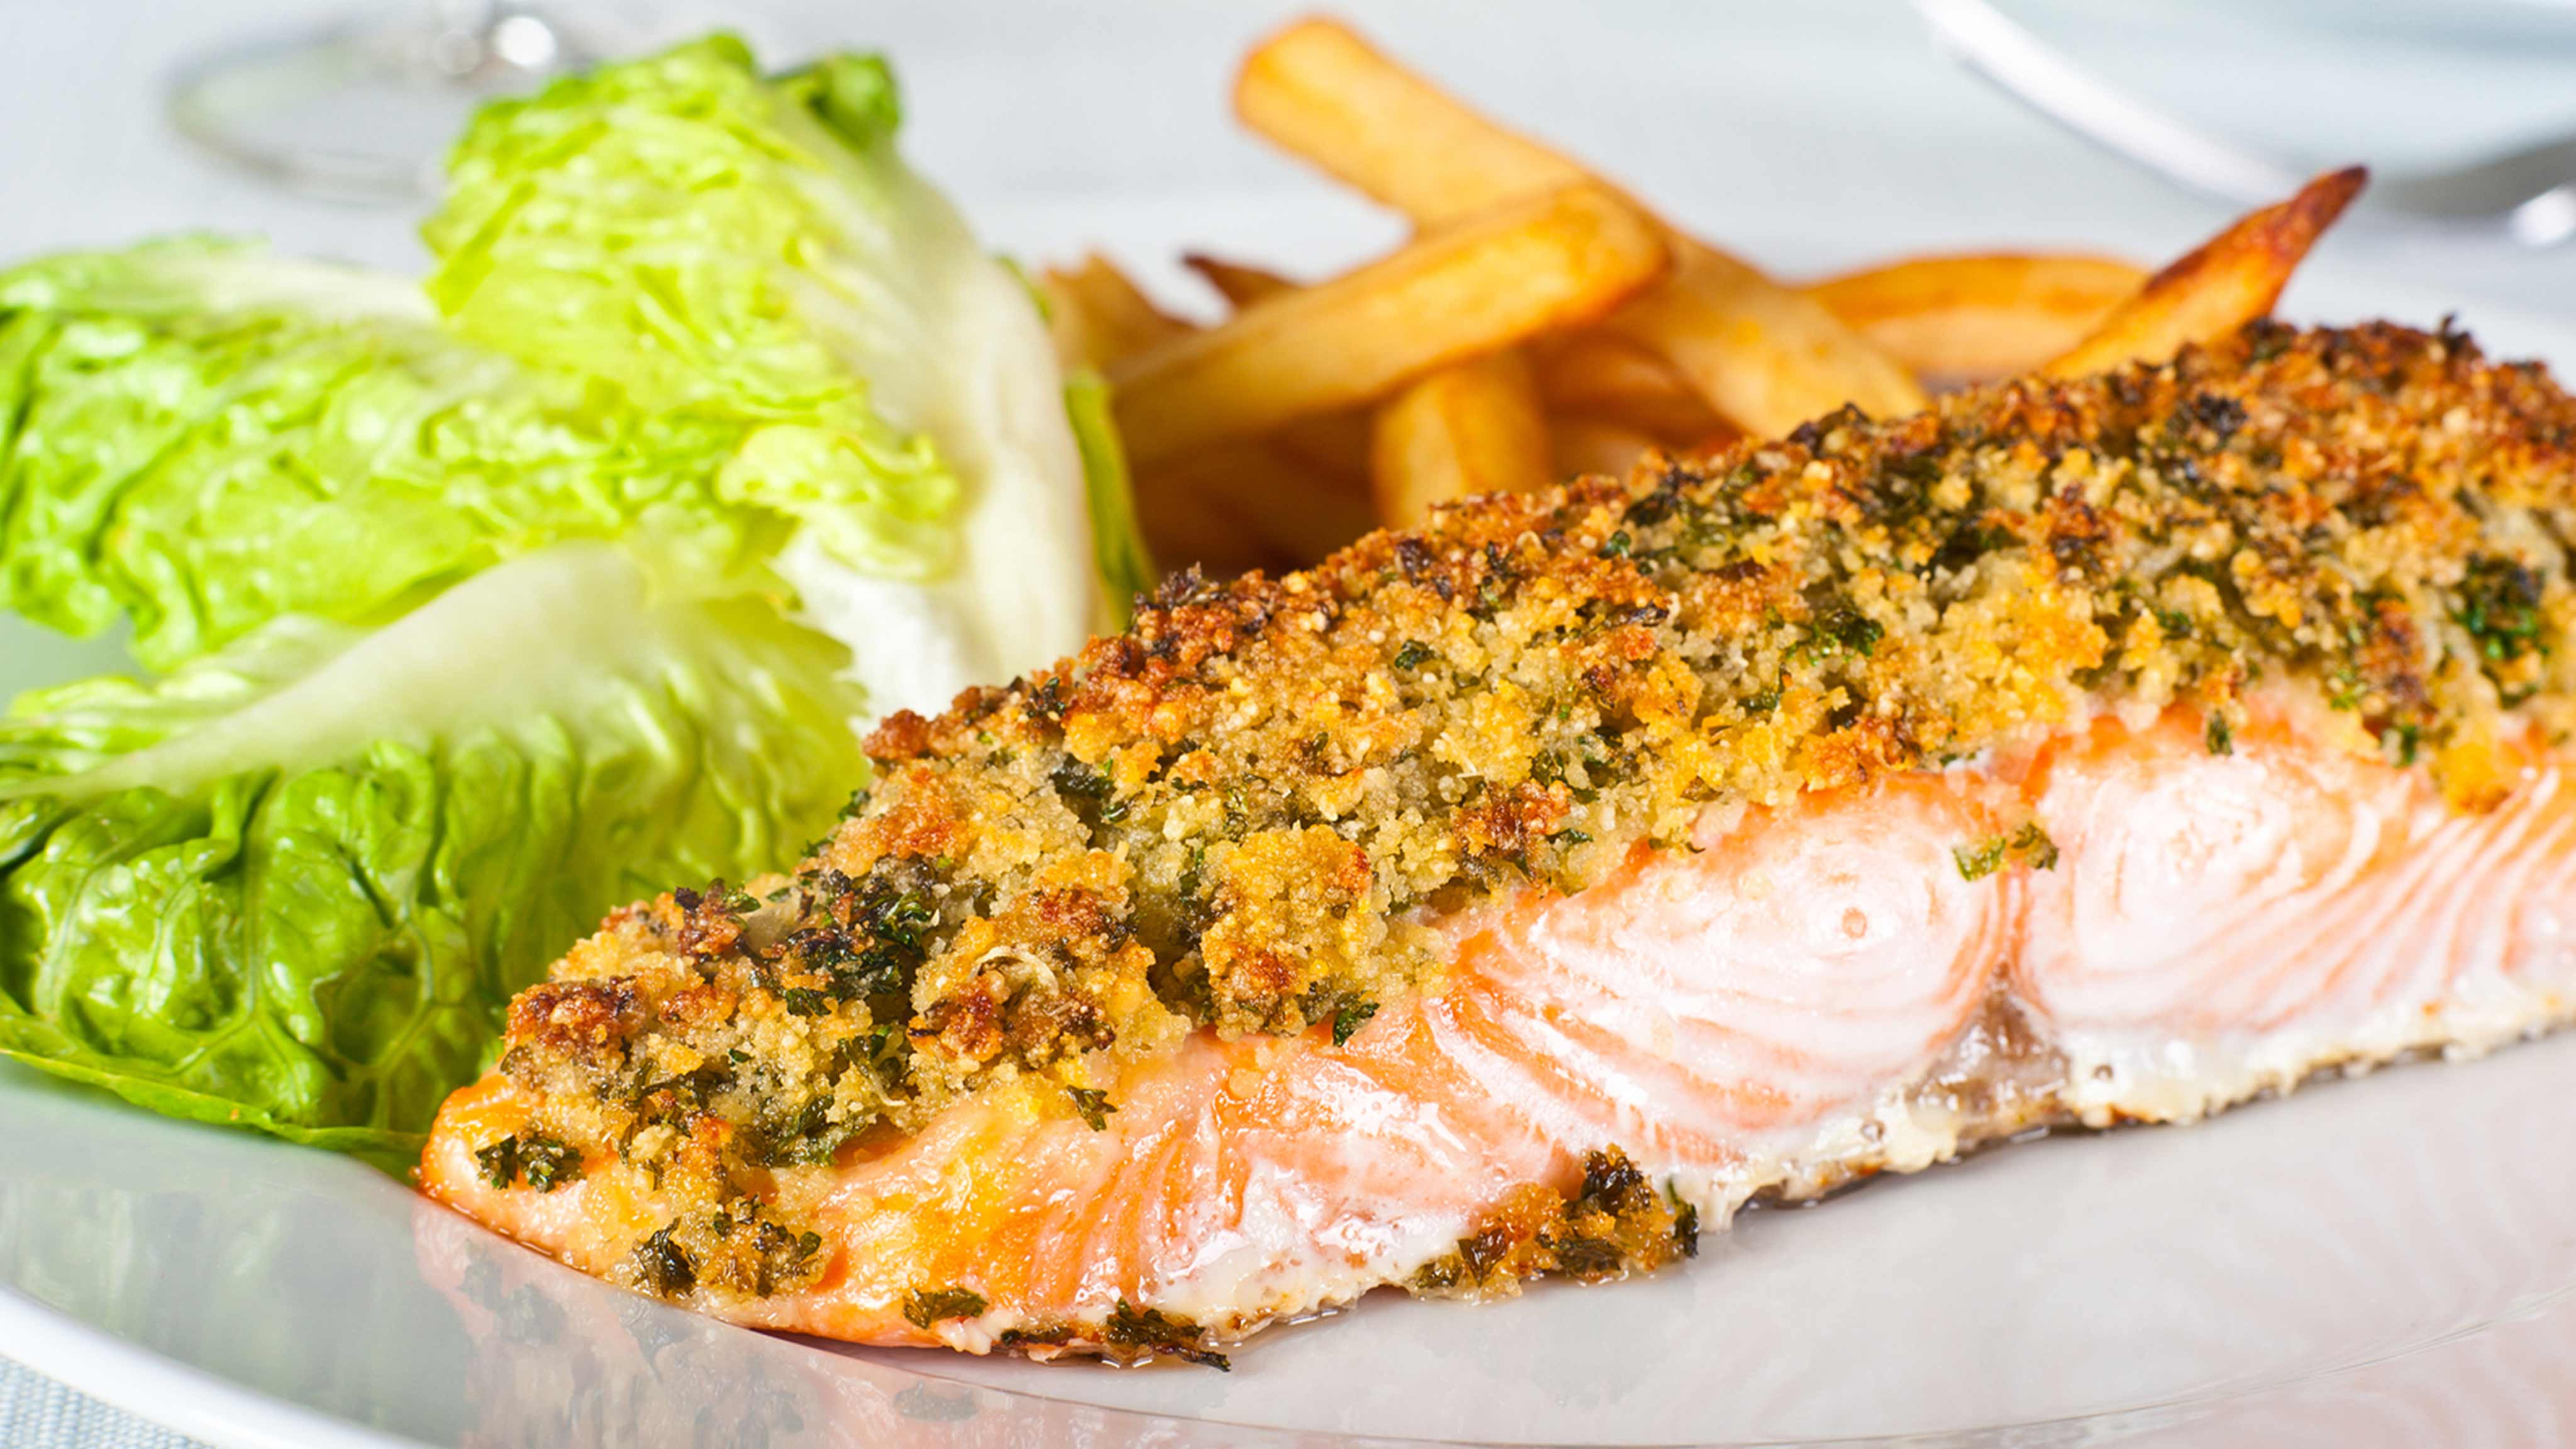 SHOP 'n SAVE - Recipe: Salmon Fillets with Country Herb Crust